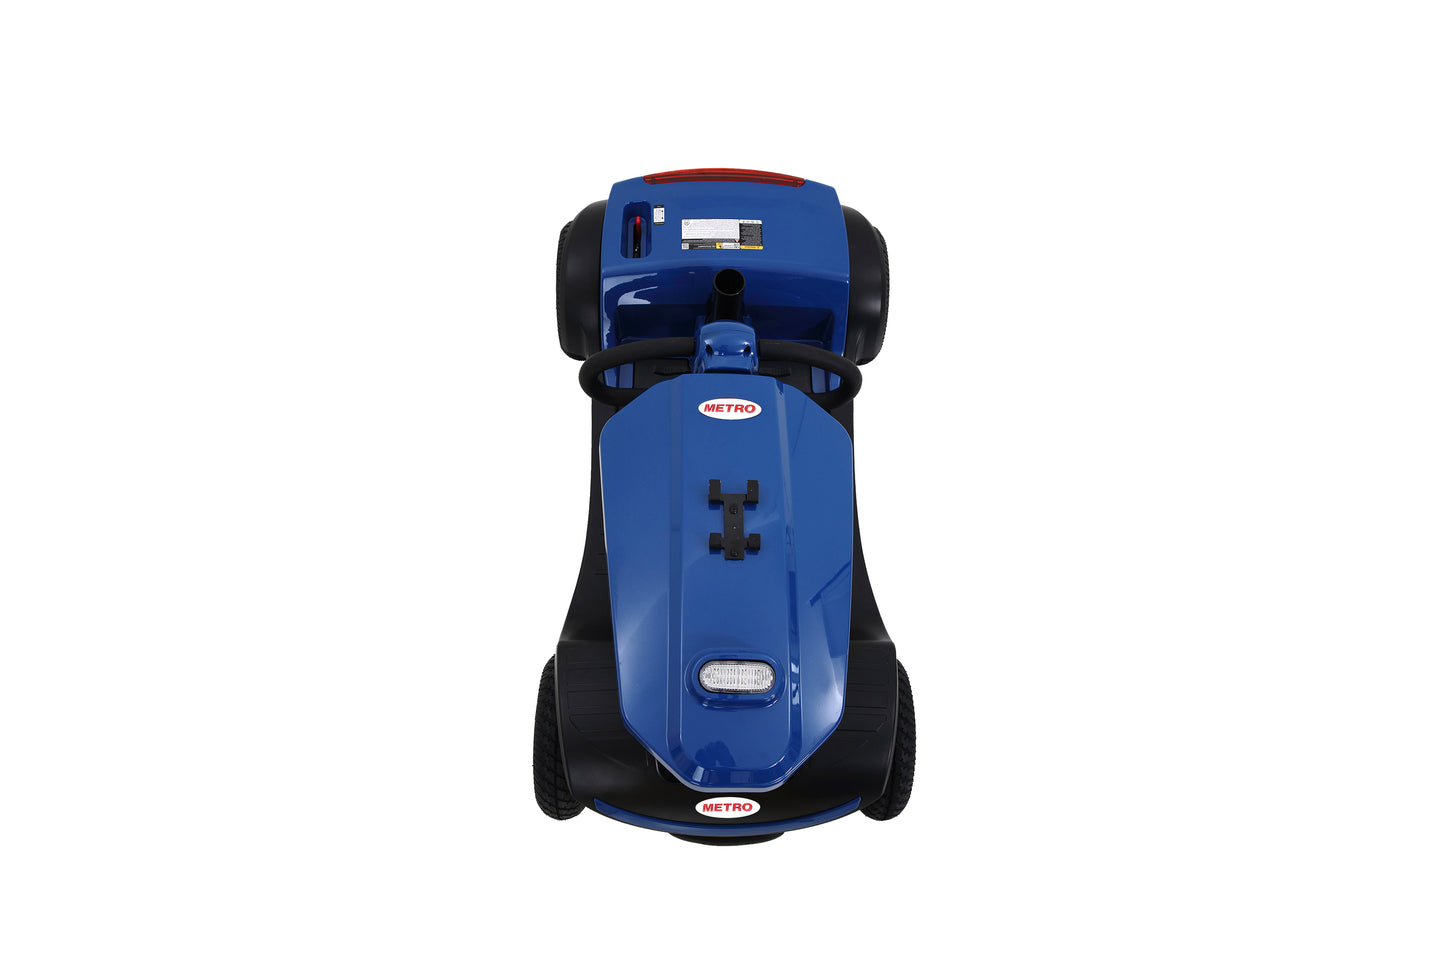 Metro Patriot Mobility Scooter - Blue